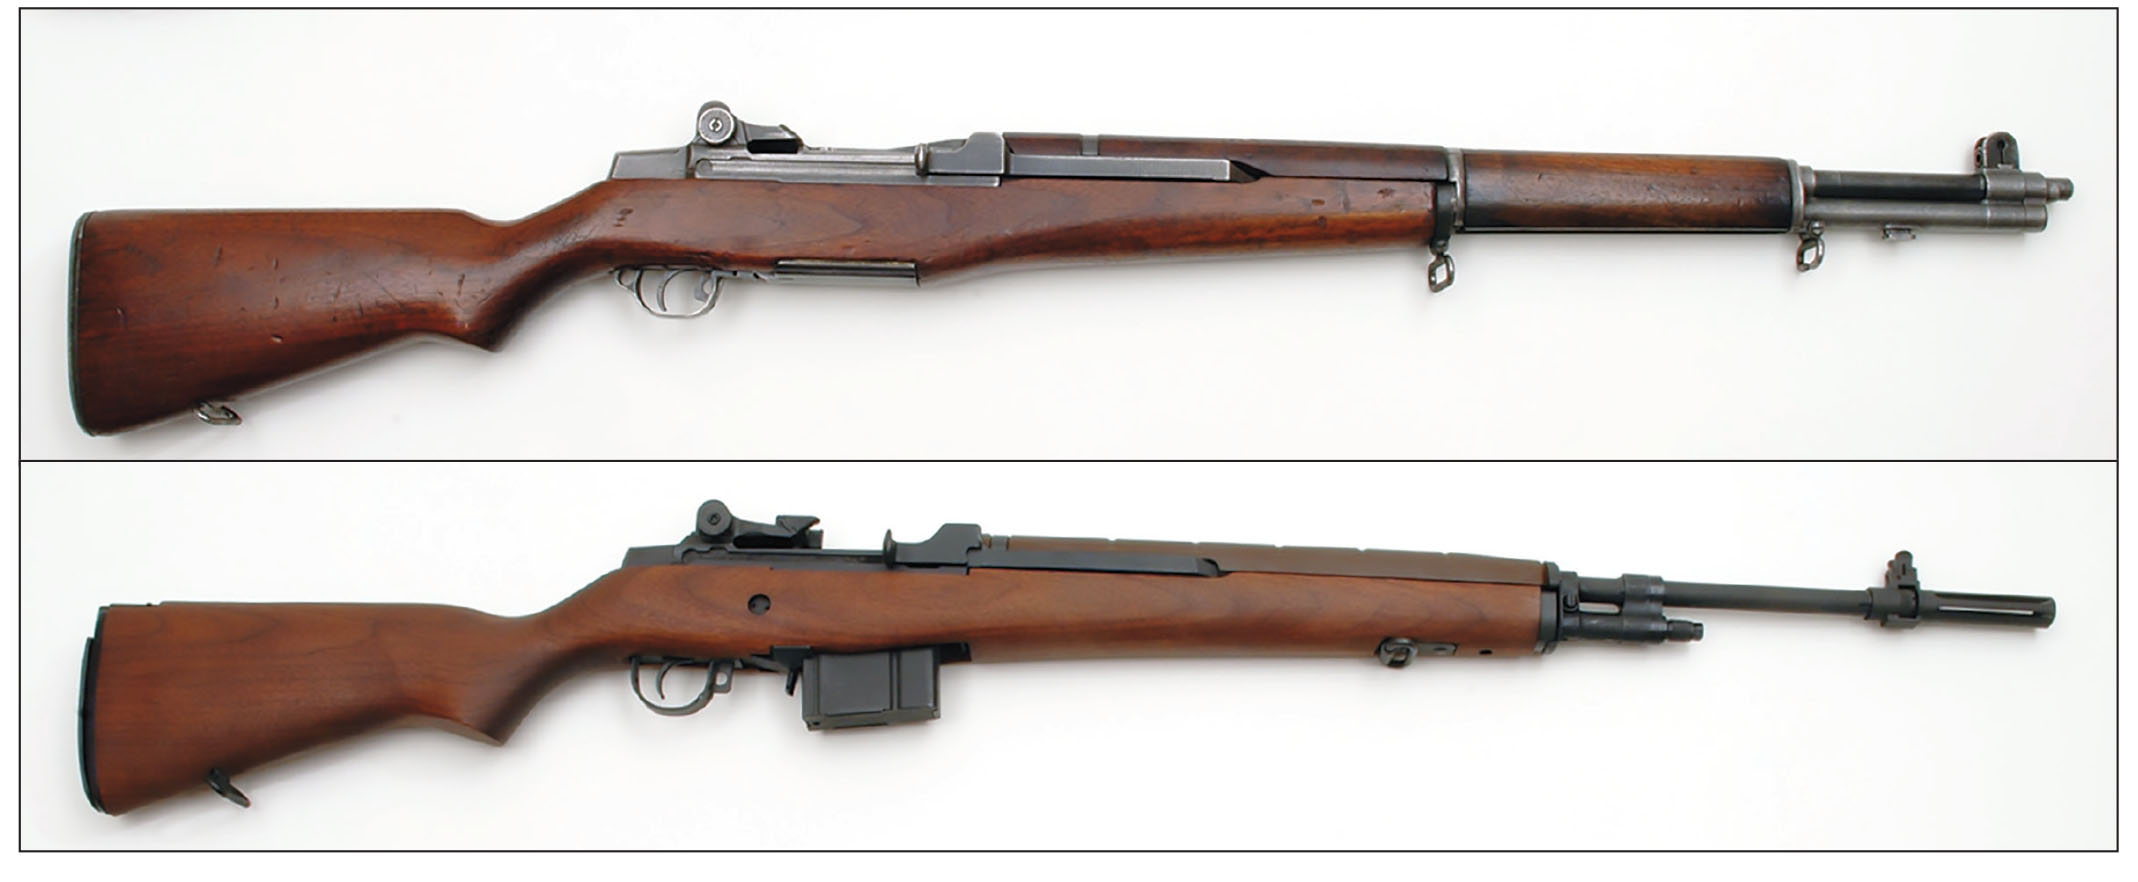 The M1 30 Garand (top), was adopted in 1936 and served until replaced by the M14 7.62mm (bottom) in 1957.